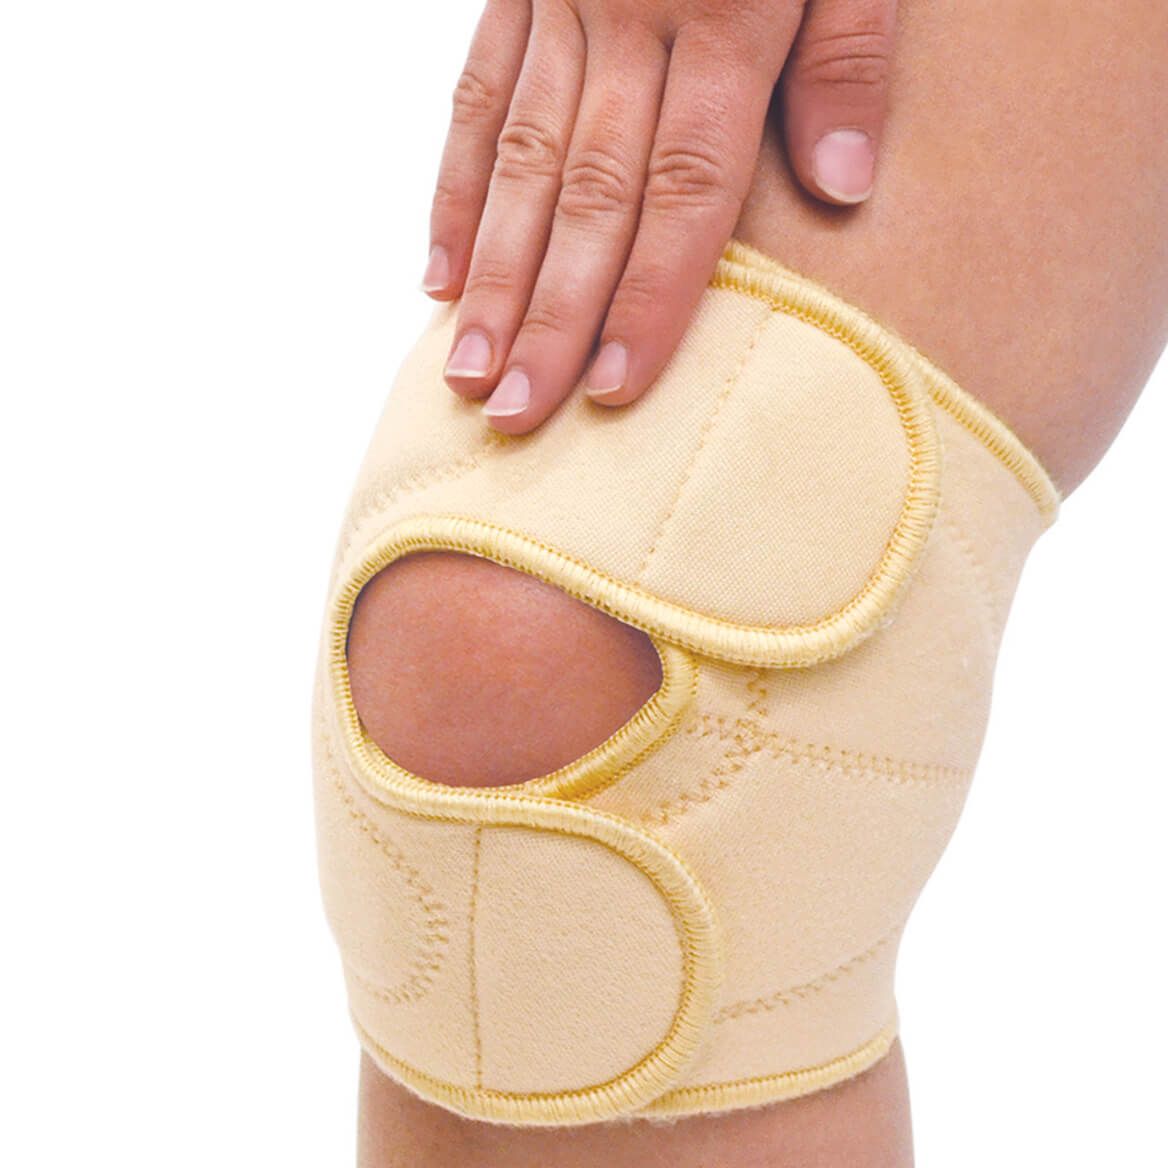 Therapeutic Knee Stabilizer + '-' + 370101